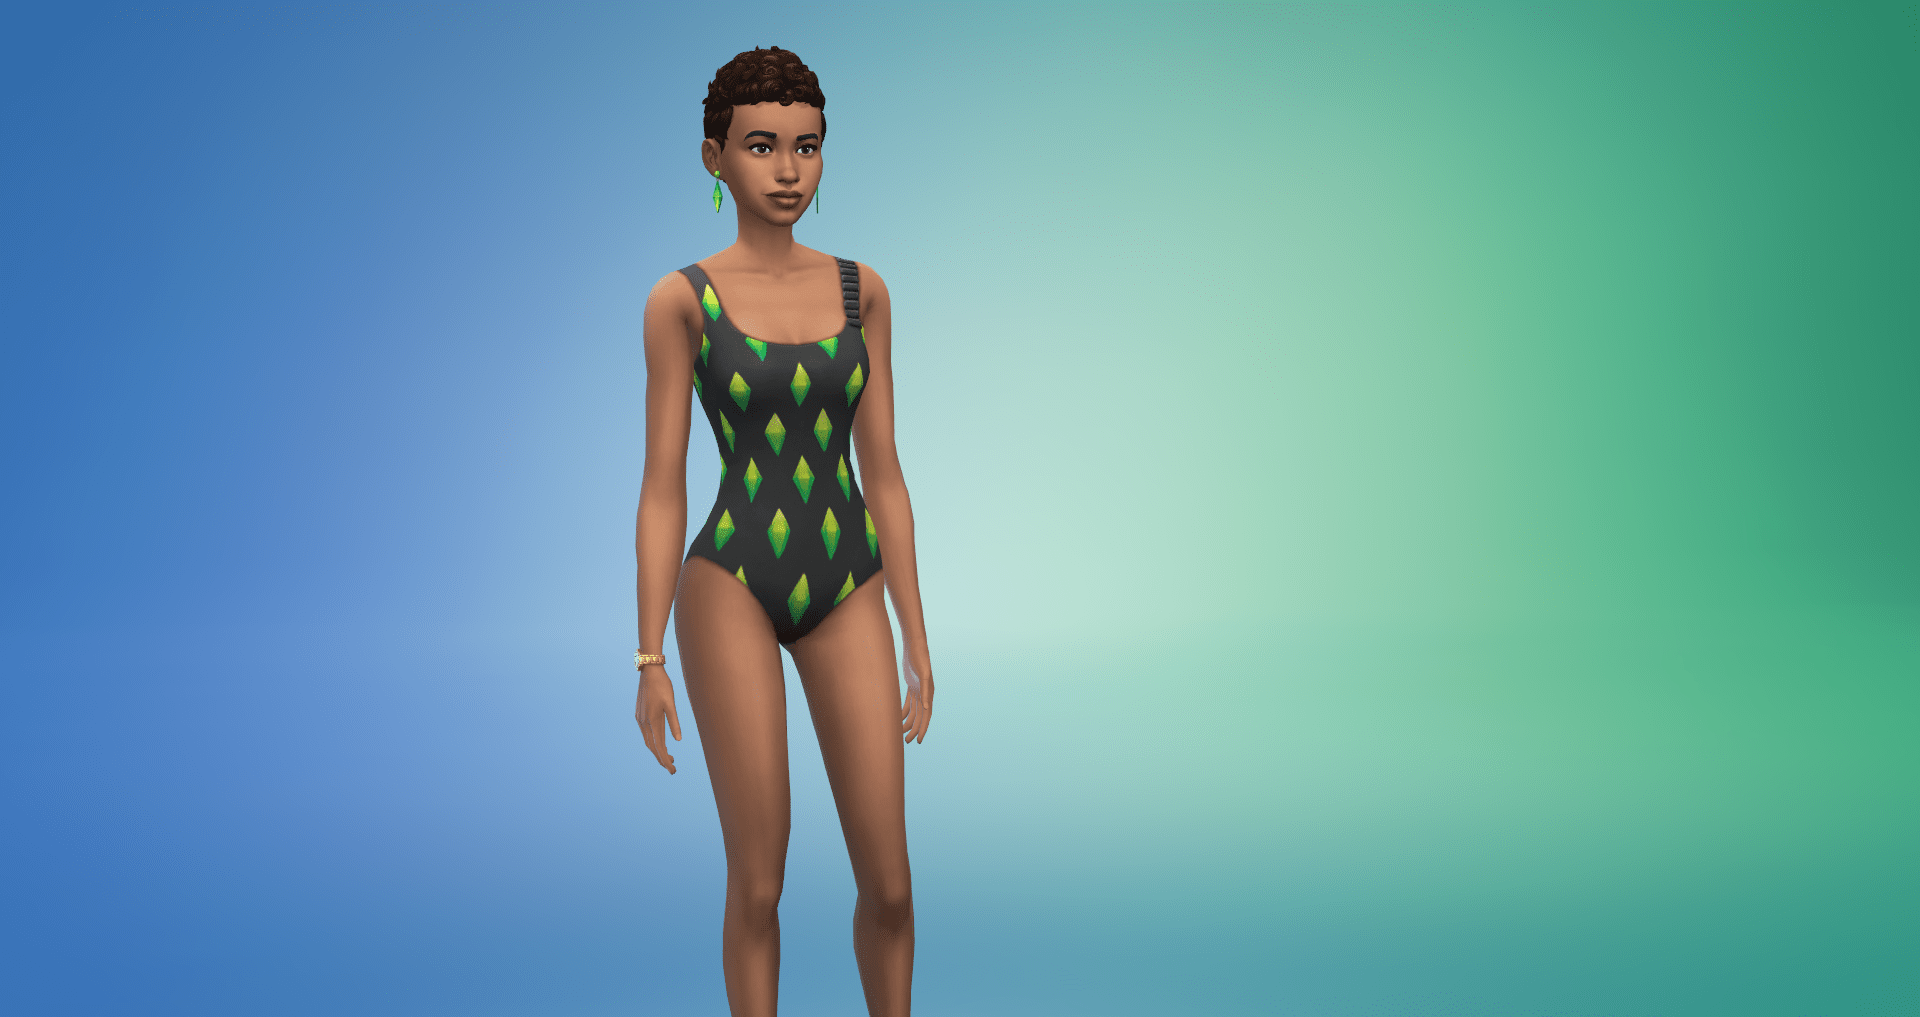 The Sims 4 Moschino Stuff Pack Now Available on PC & Mac - BeyondSims